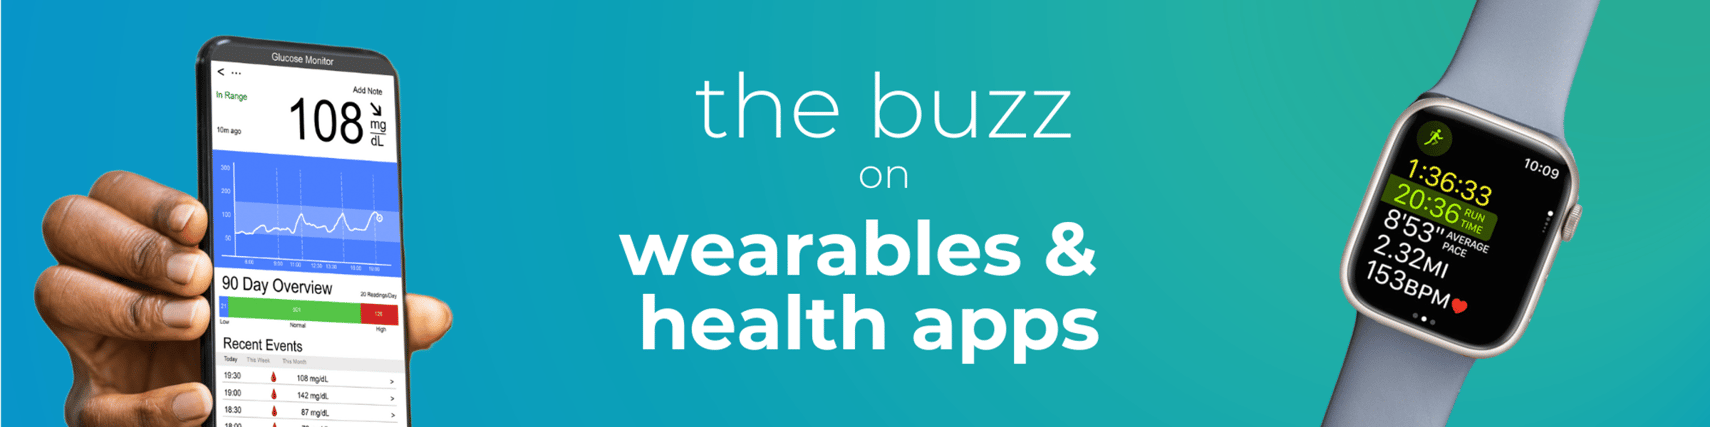 the buzz on wearables and health apps landing page header-1